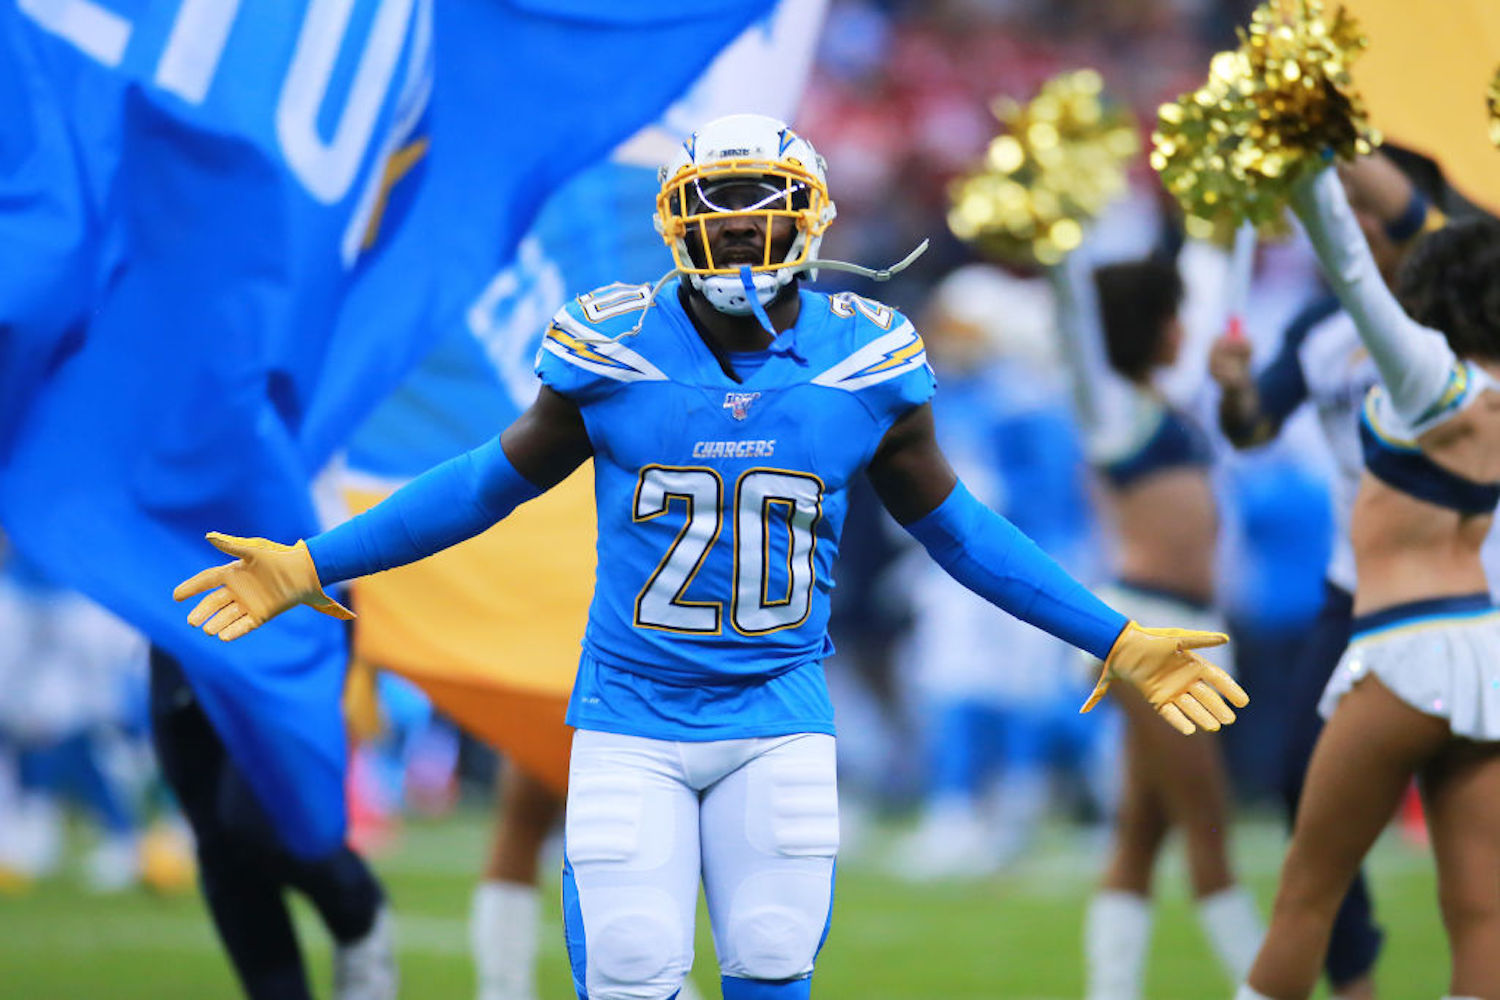 Desmond King was named an All-Pro just two years ago, but the LA Chargers just dealt him to the Tennessee Titans ahead of the trade deadline.